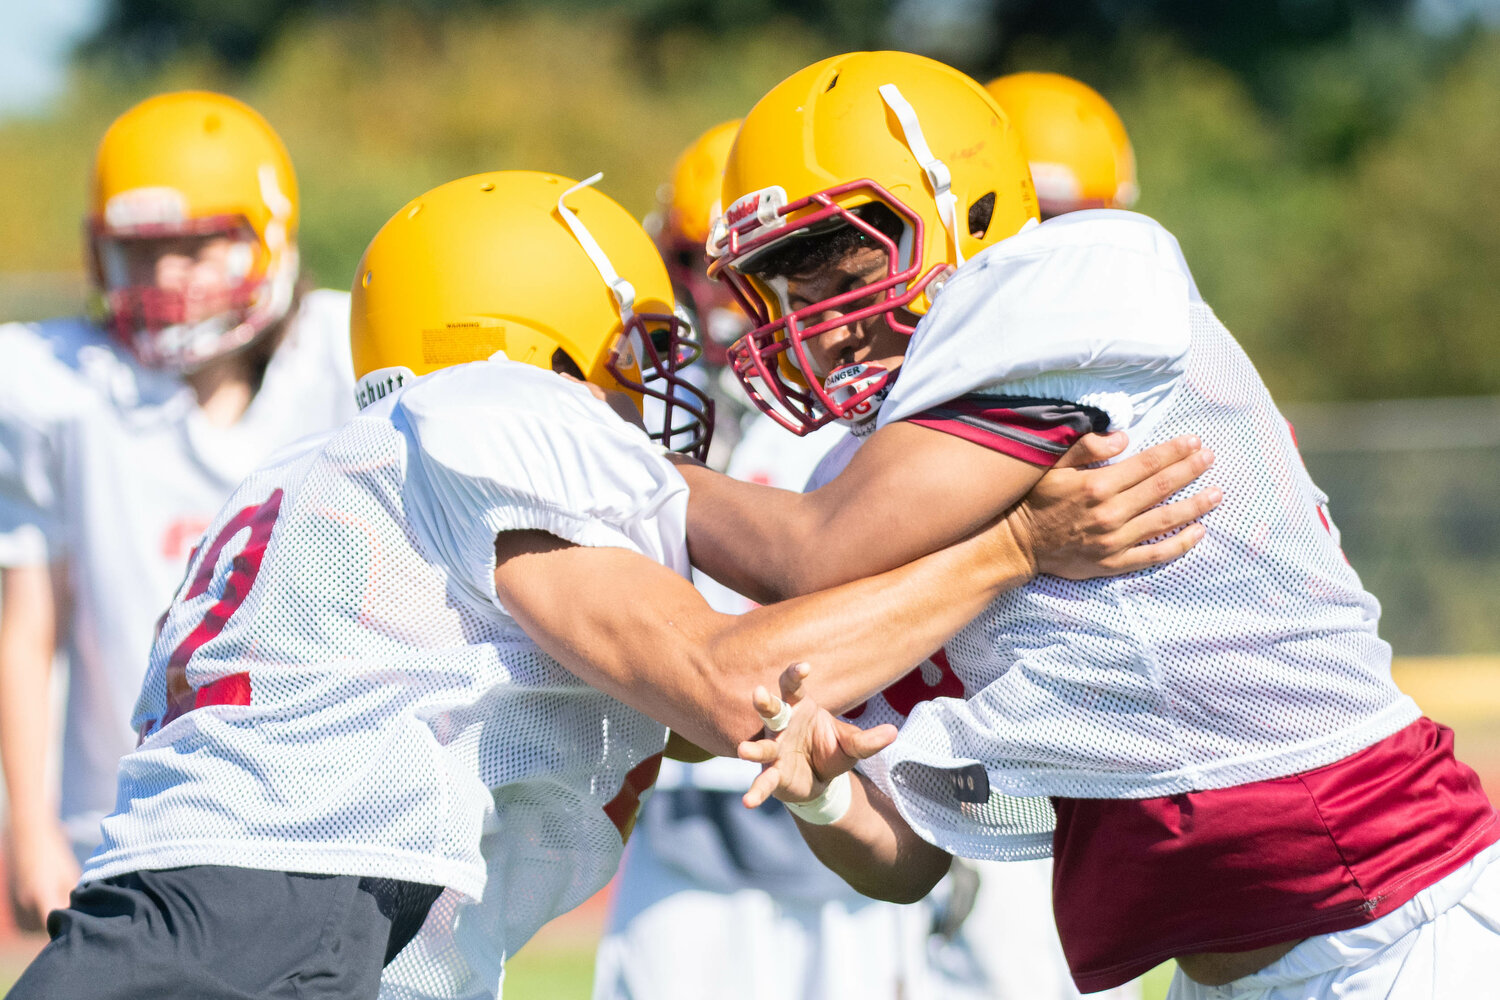 Lincoln Ruiz (left) takes on Fortune Solonio (right) in a one-on-one drill at Winlock's practice on Aug. 19.